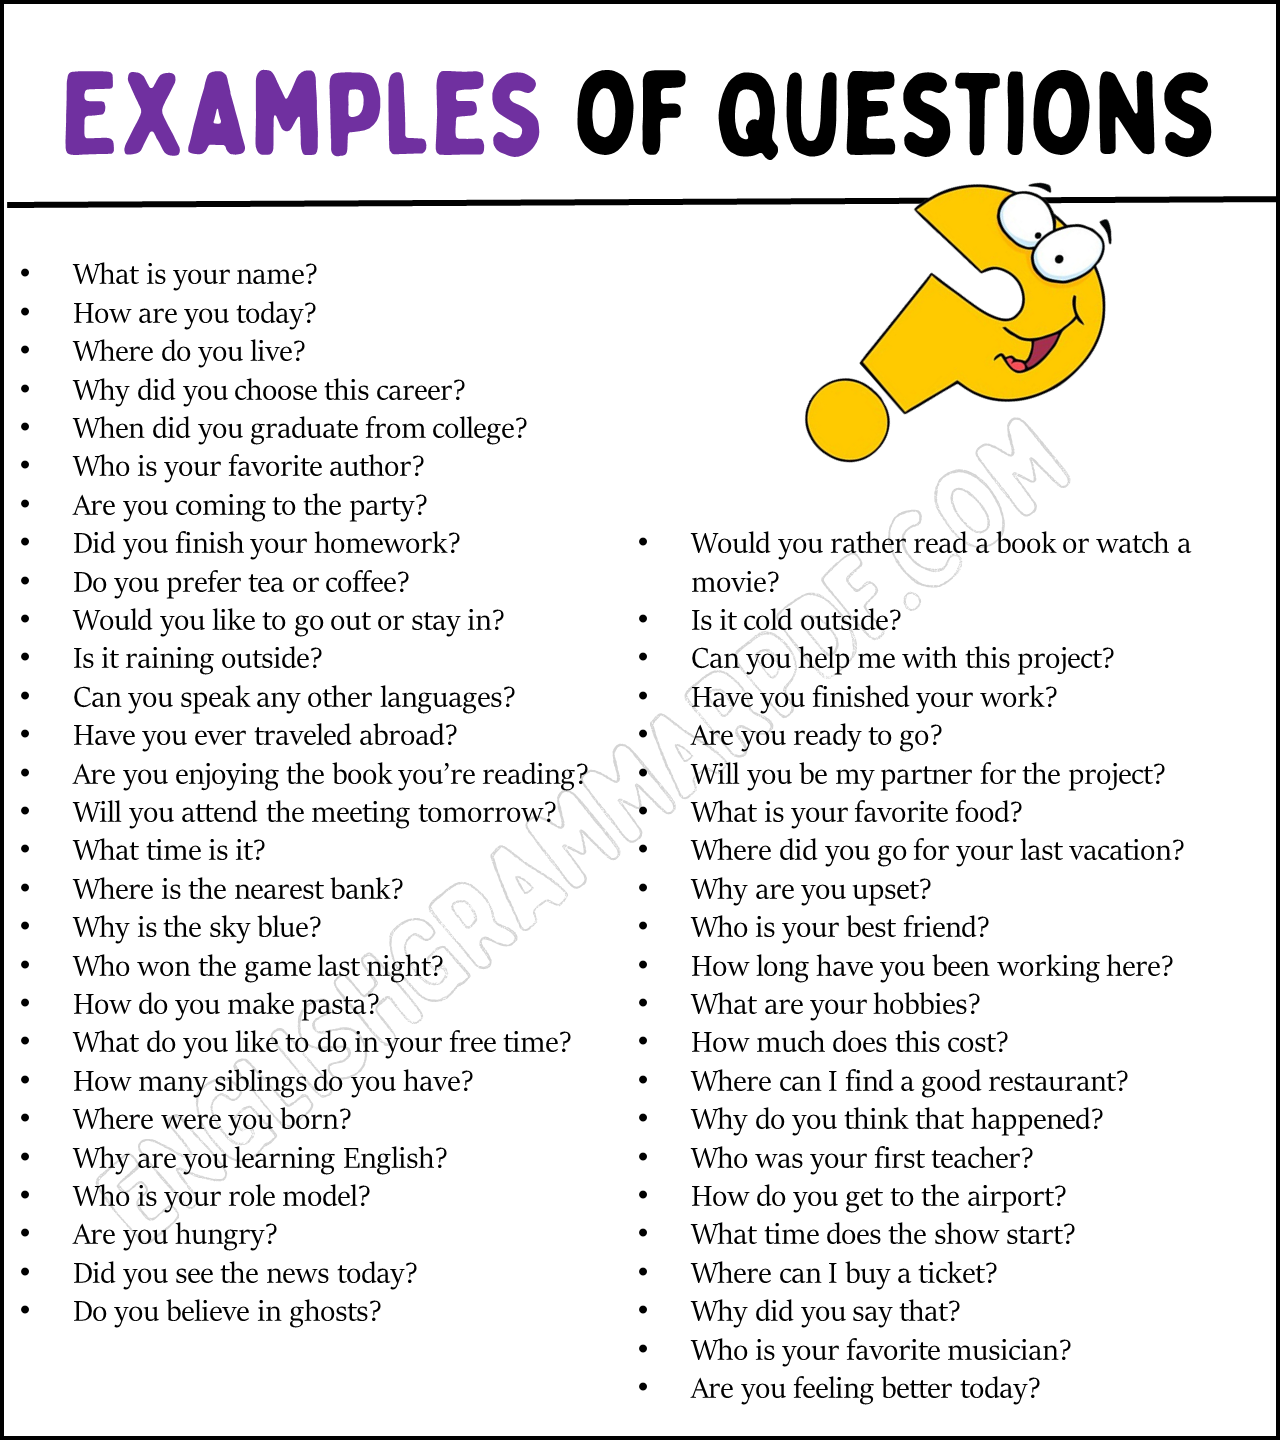 Examples of Questions